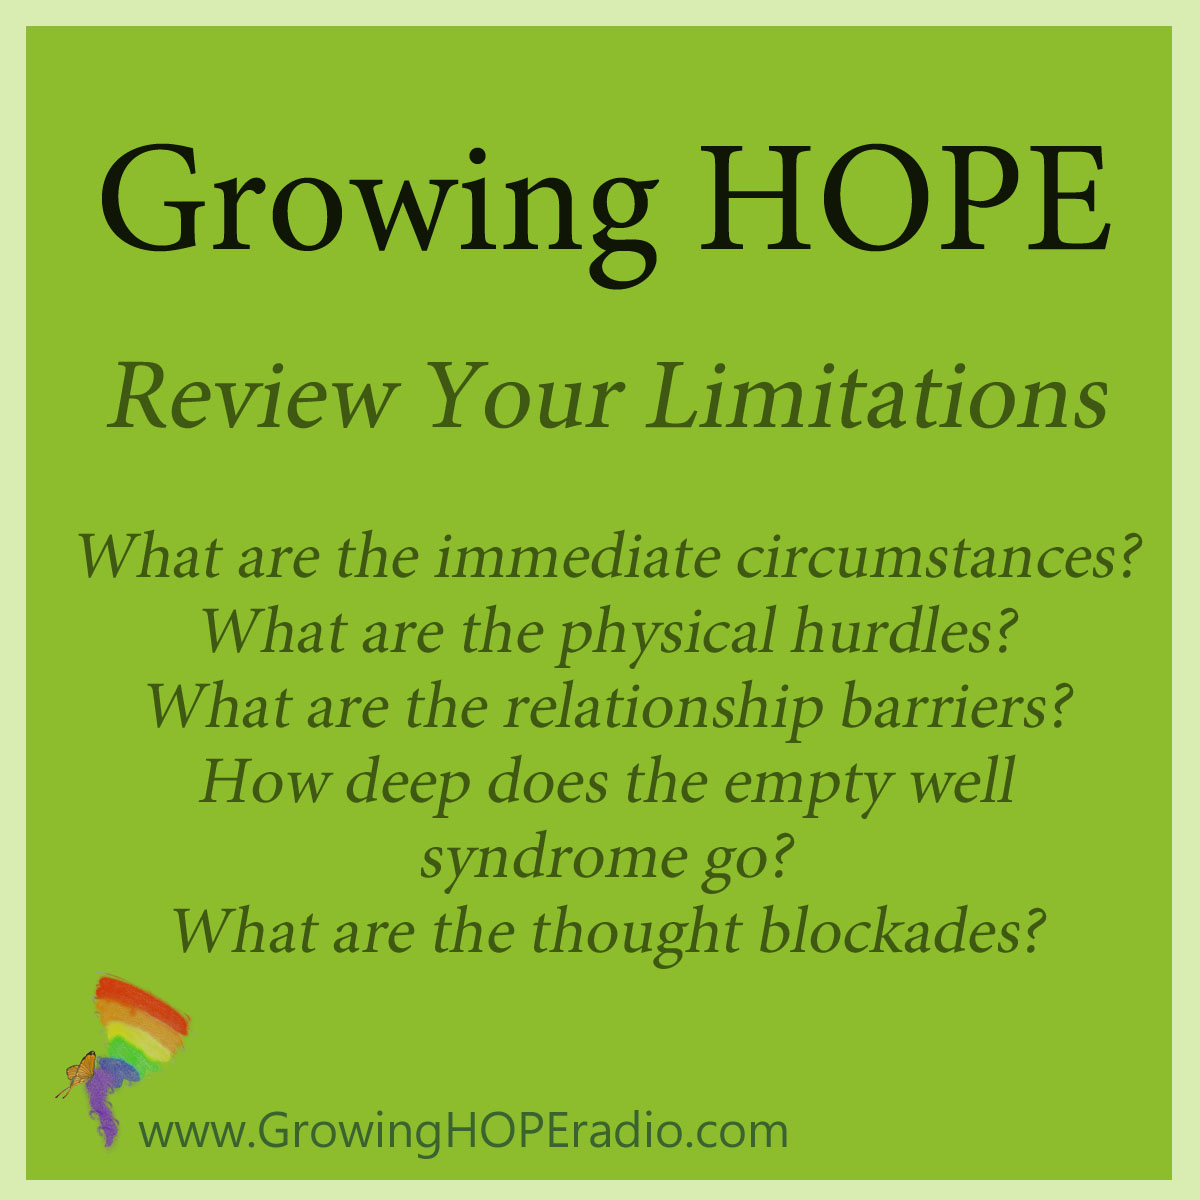 #GrowingHOPE - review your limitations